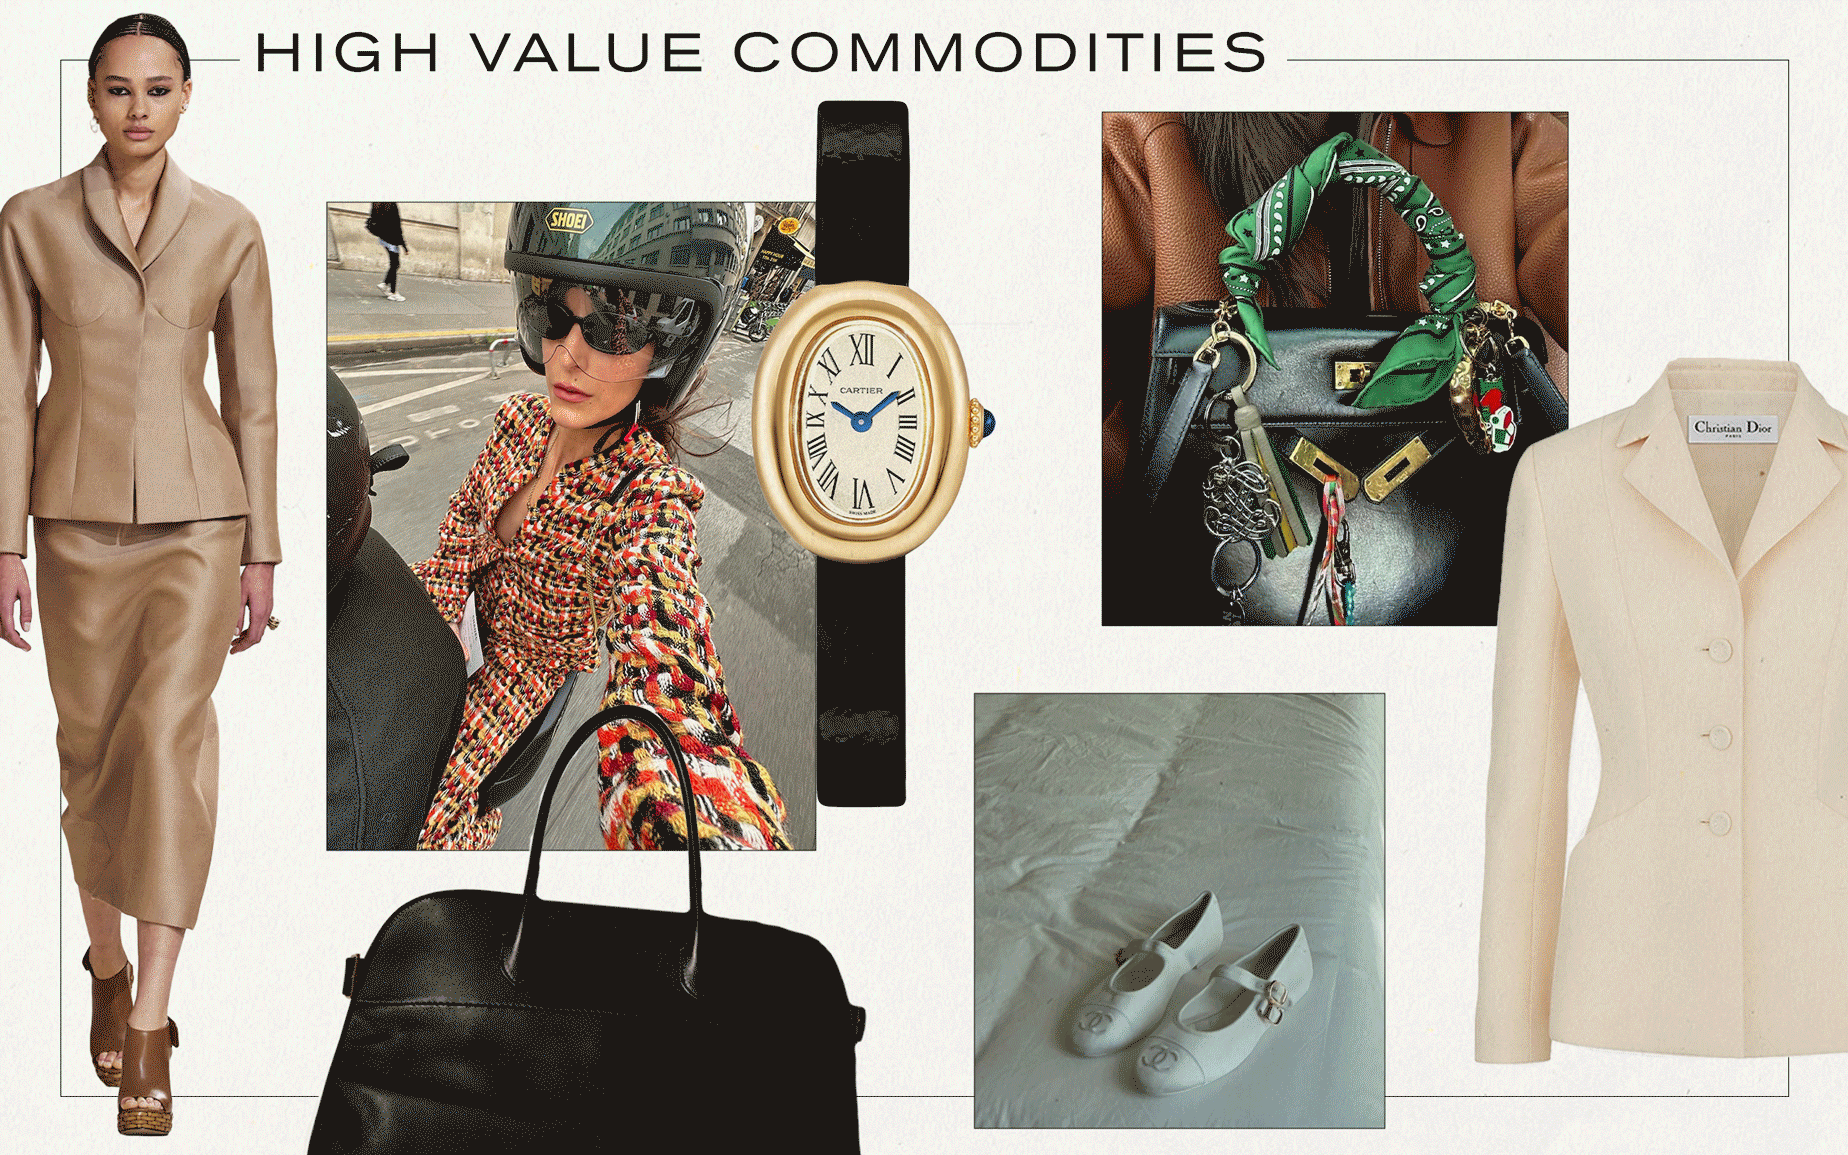 Spring Summer 2024 Shopping Trend Guide: A collage of runway, IG, and product imagery showcasing high-value commodities to buy for spring 2024.